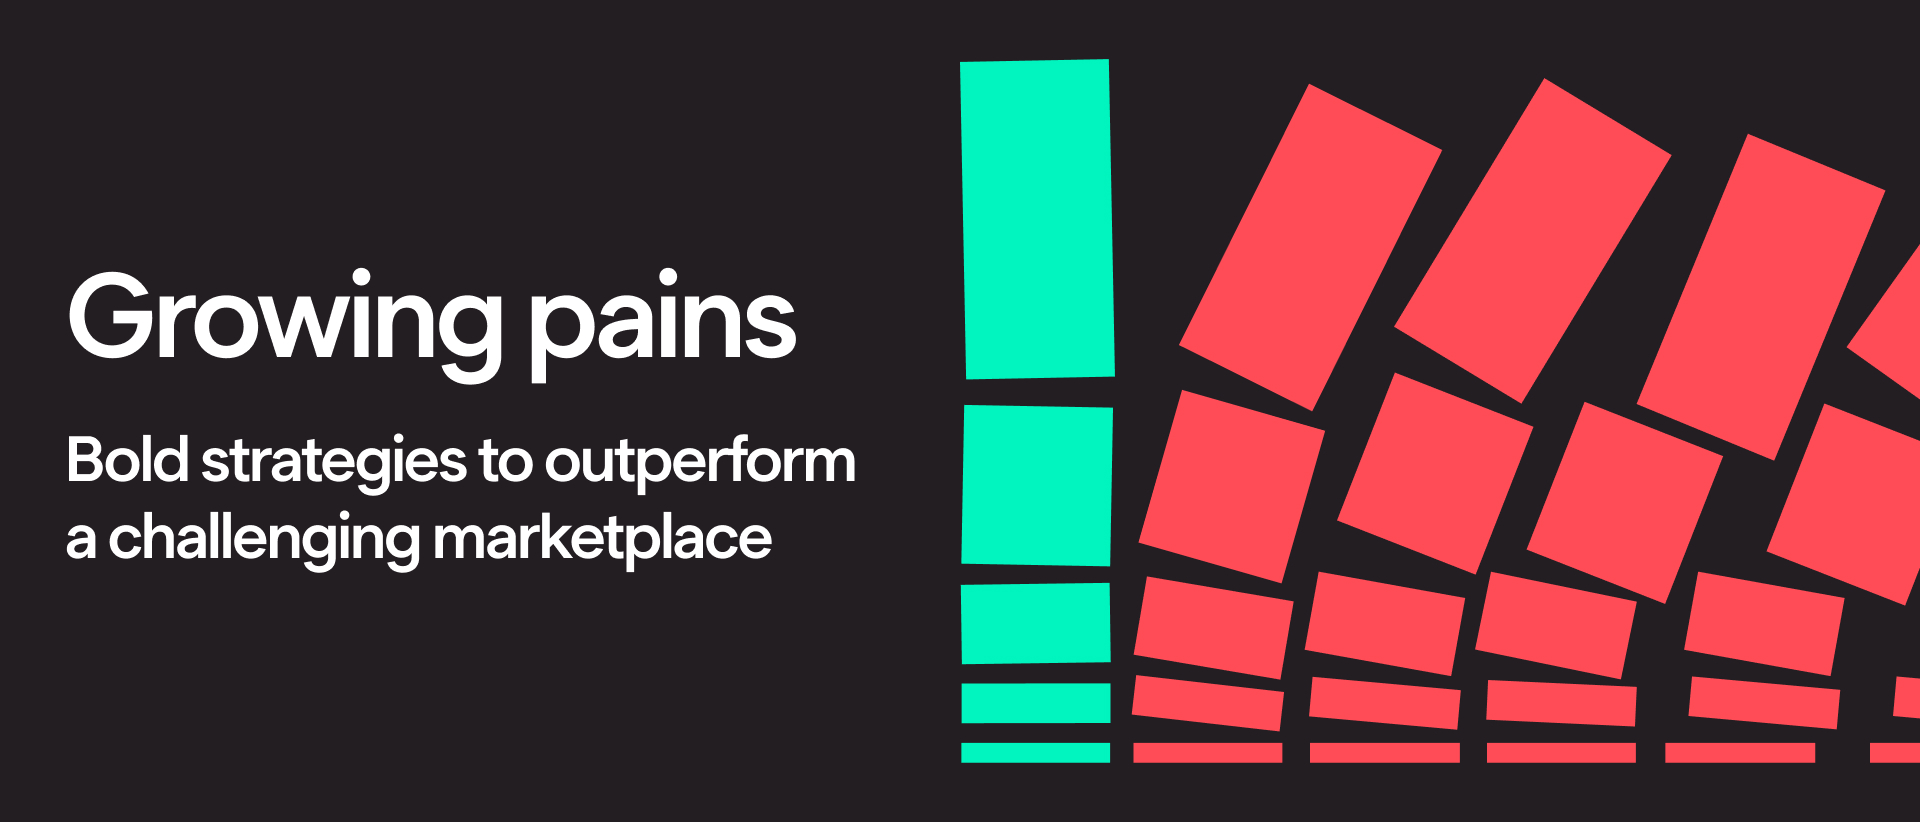 Growing pain: Bold strategies to outperform a challenging marketplace